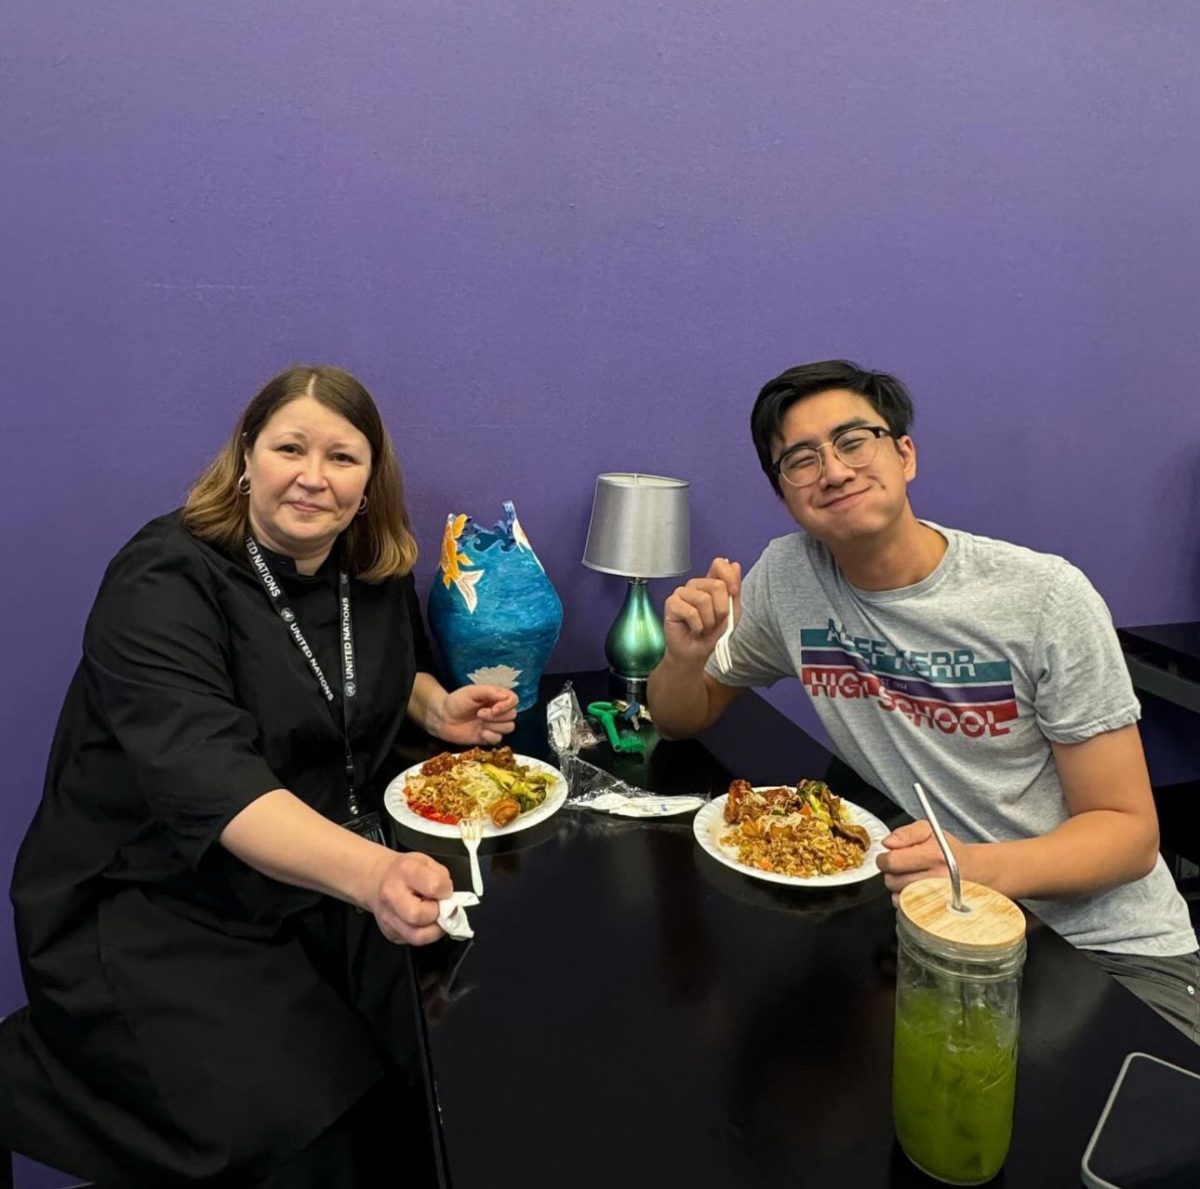 Ryan+Quach+and+Evguenia+Volkova+enjoy+their+Chinese+takeout+provided+by+STUCO+in+the+teachers+lounge.+For+the+rest+of+this+week%2C+all+students+are+encourage+to+show+gratitude+to+all+Kerr+teachers.